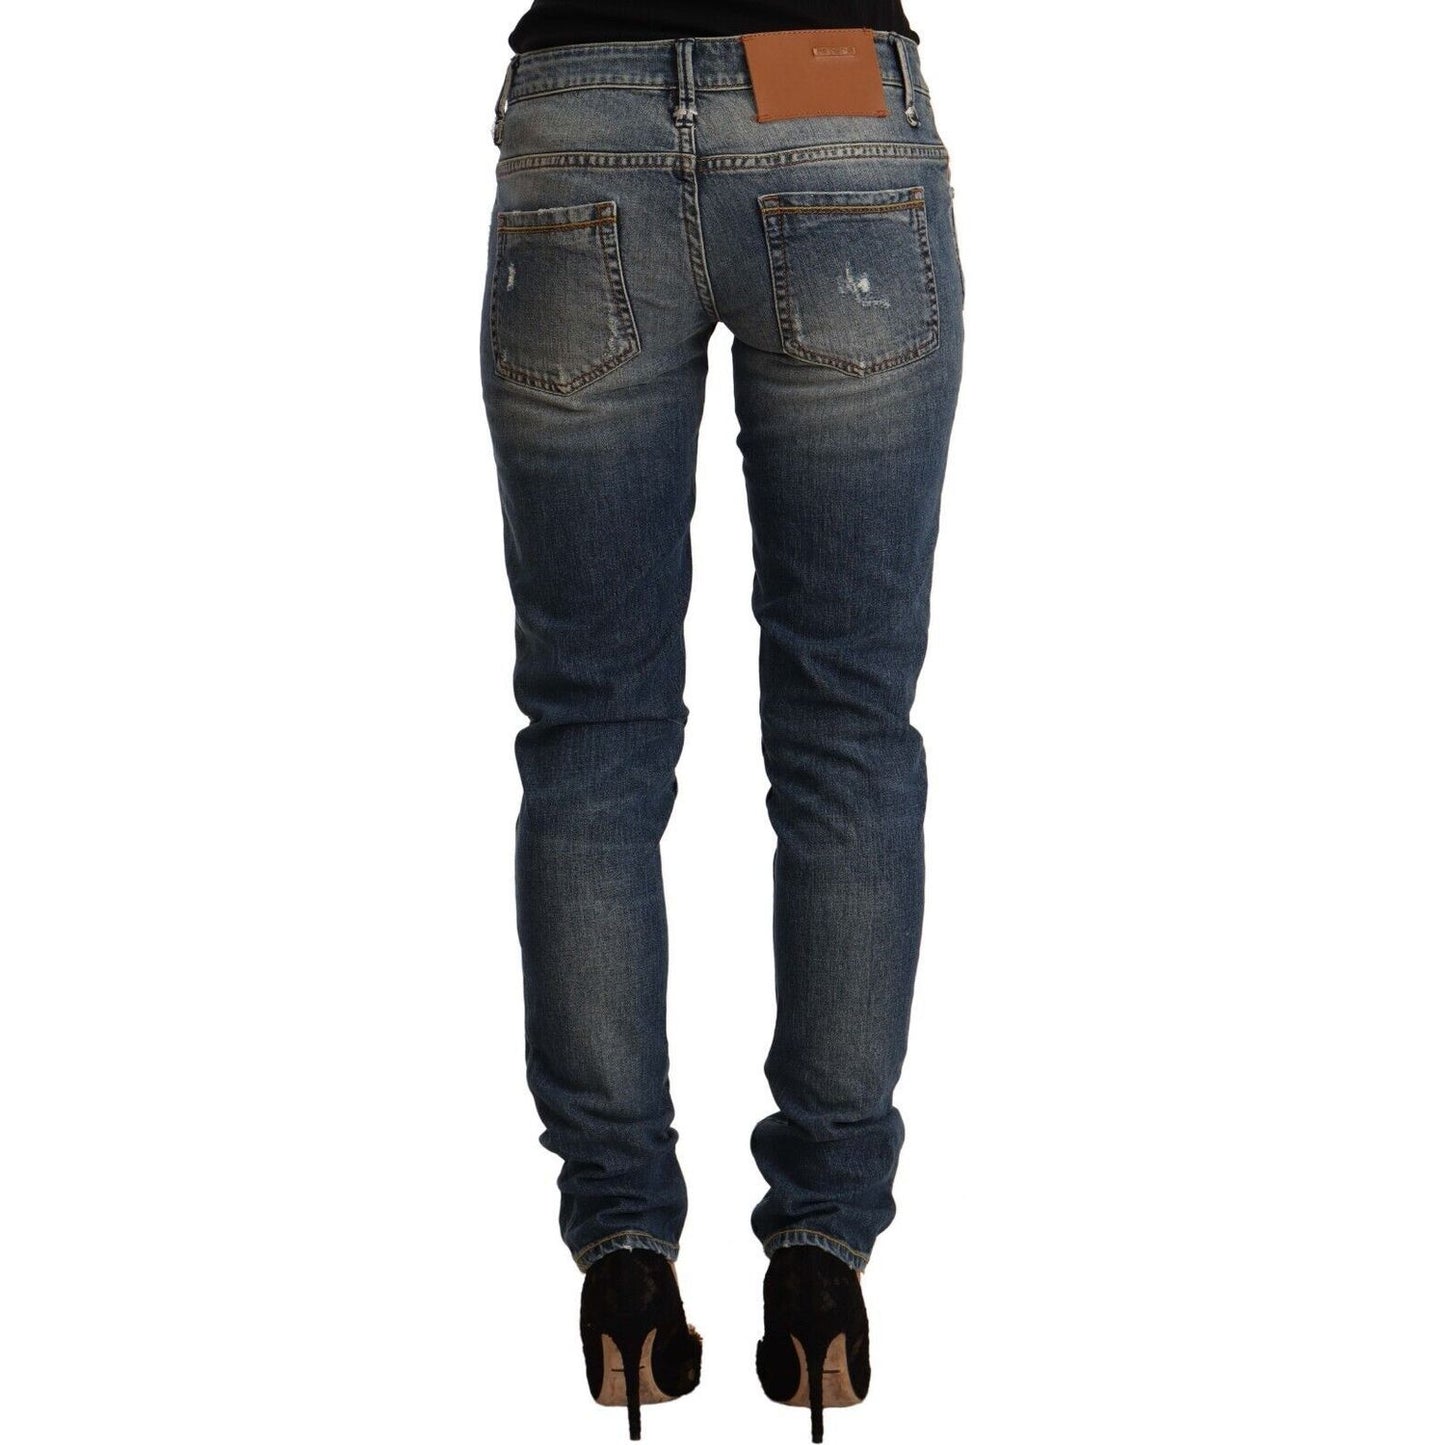 Acht Blue Washed Skinny Cotton Blend Jeans blue-washed-cotton-mid-waist-skinny-denim-jeans-1